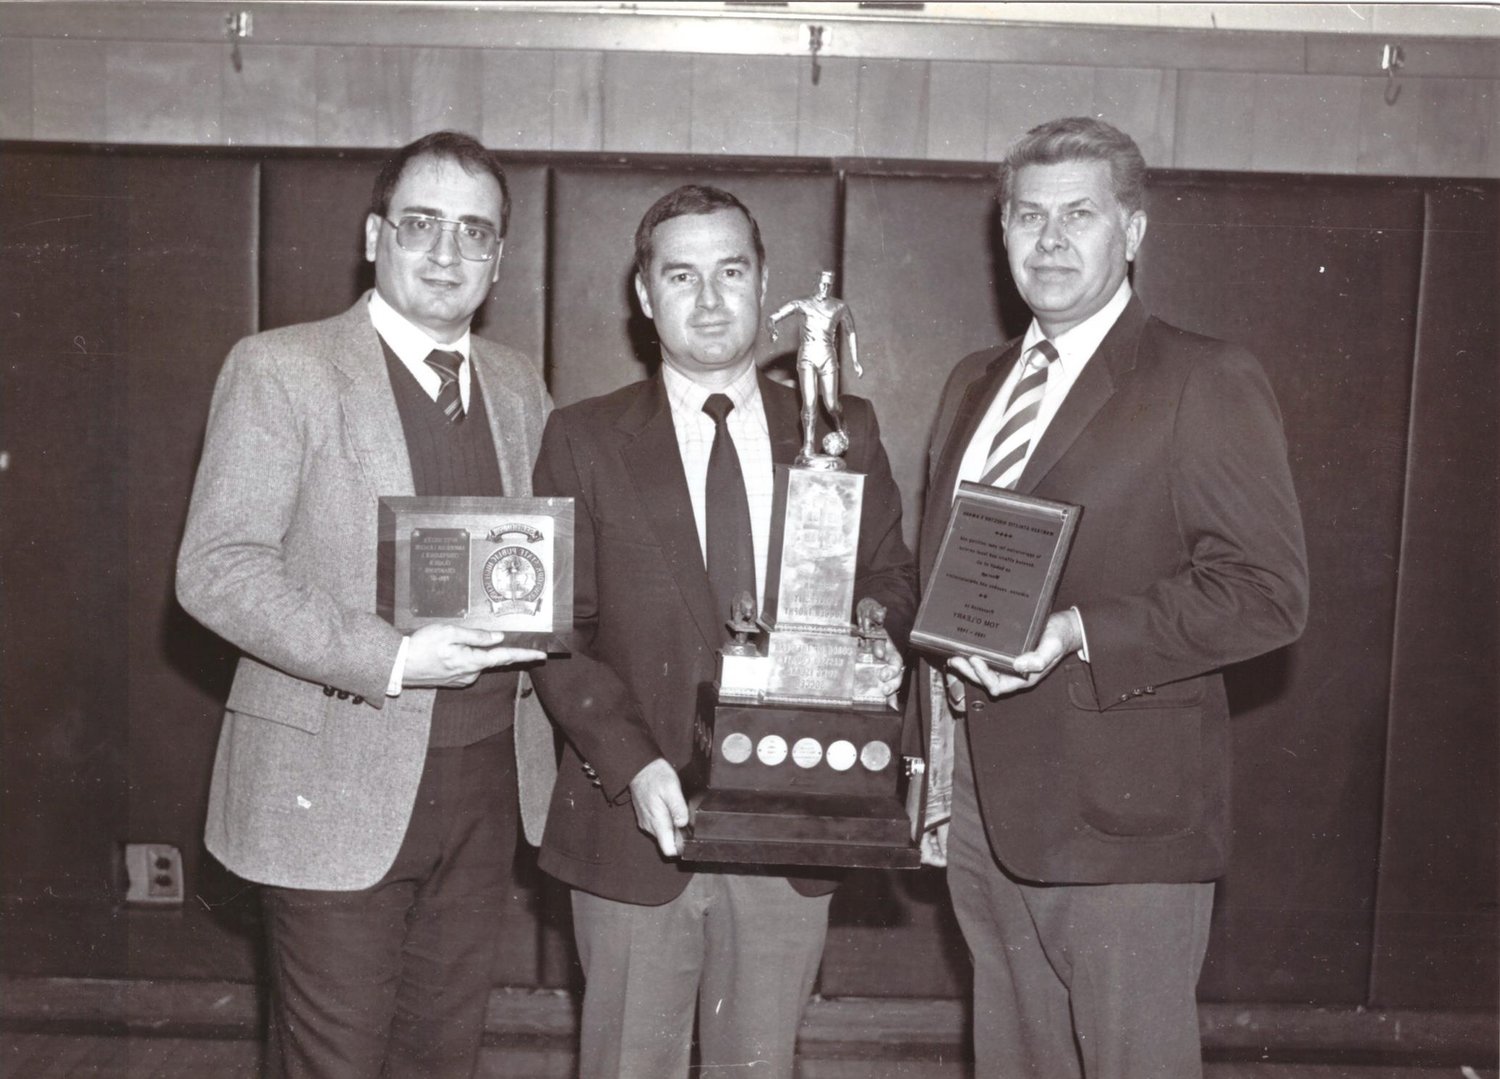 Tom O’Leary, center, with then-superintendent Carl Bonuso, far left, and former athletic director Paul Schotte after O’Leary won a Coach of the Year Award.